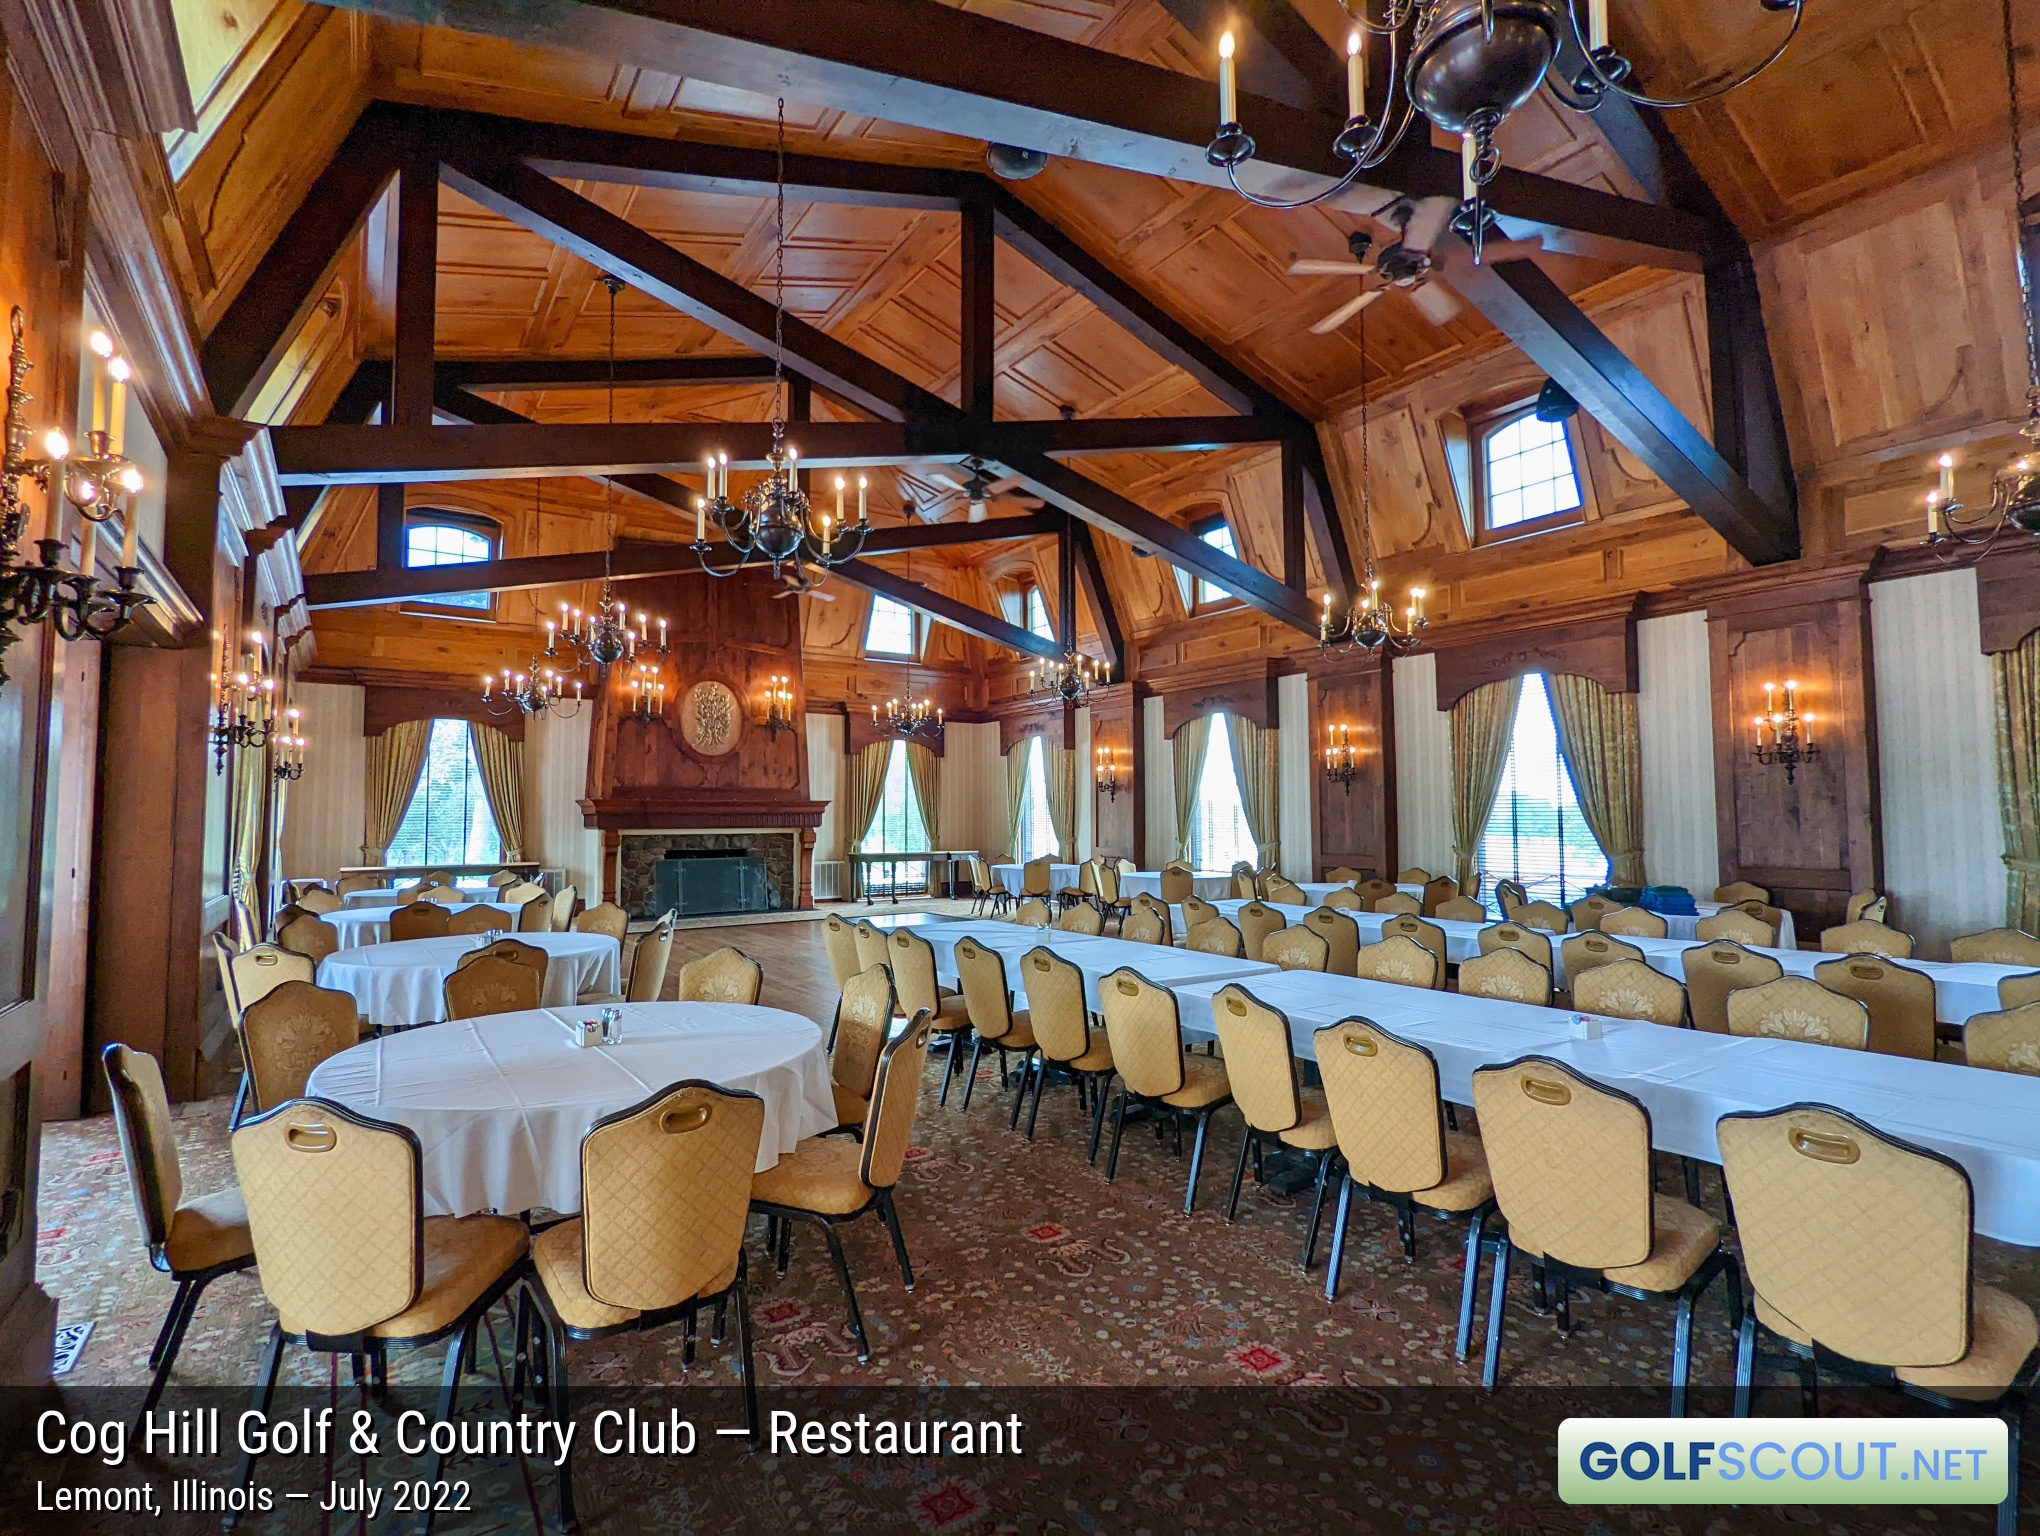 Photo of the restaurant at Cog Hill Course #3 in Lemont, Illinois. Cog Hill's main dining hall has 30 foot ceilings.